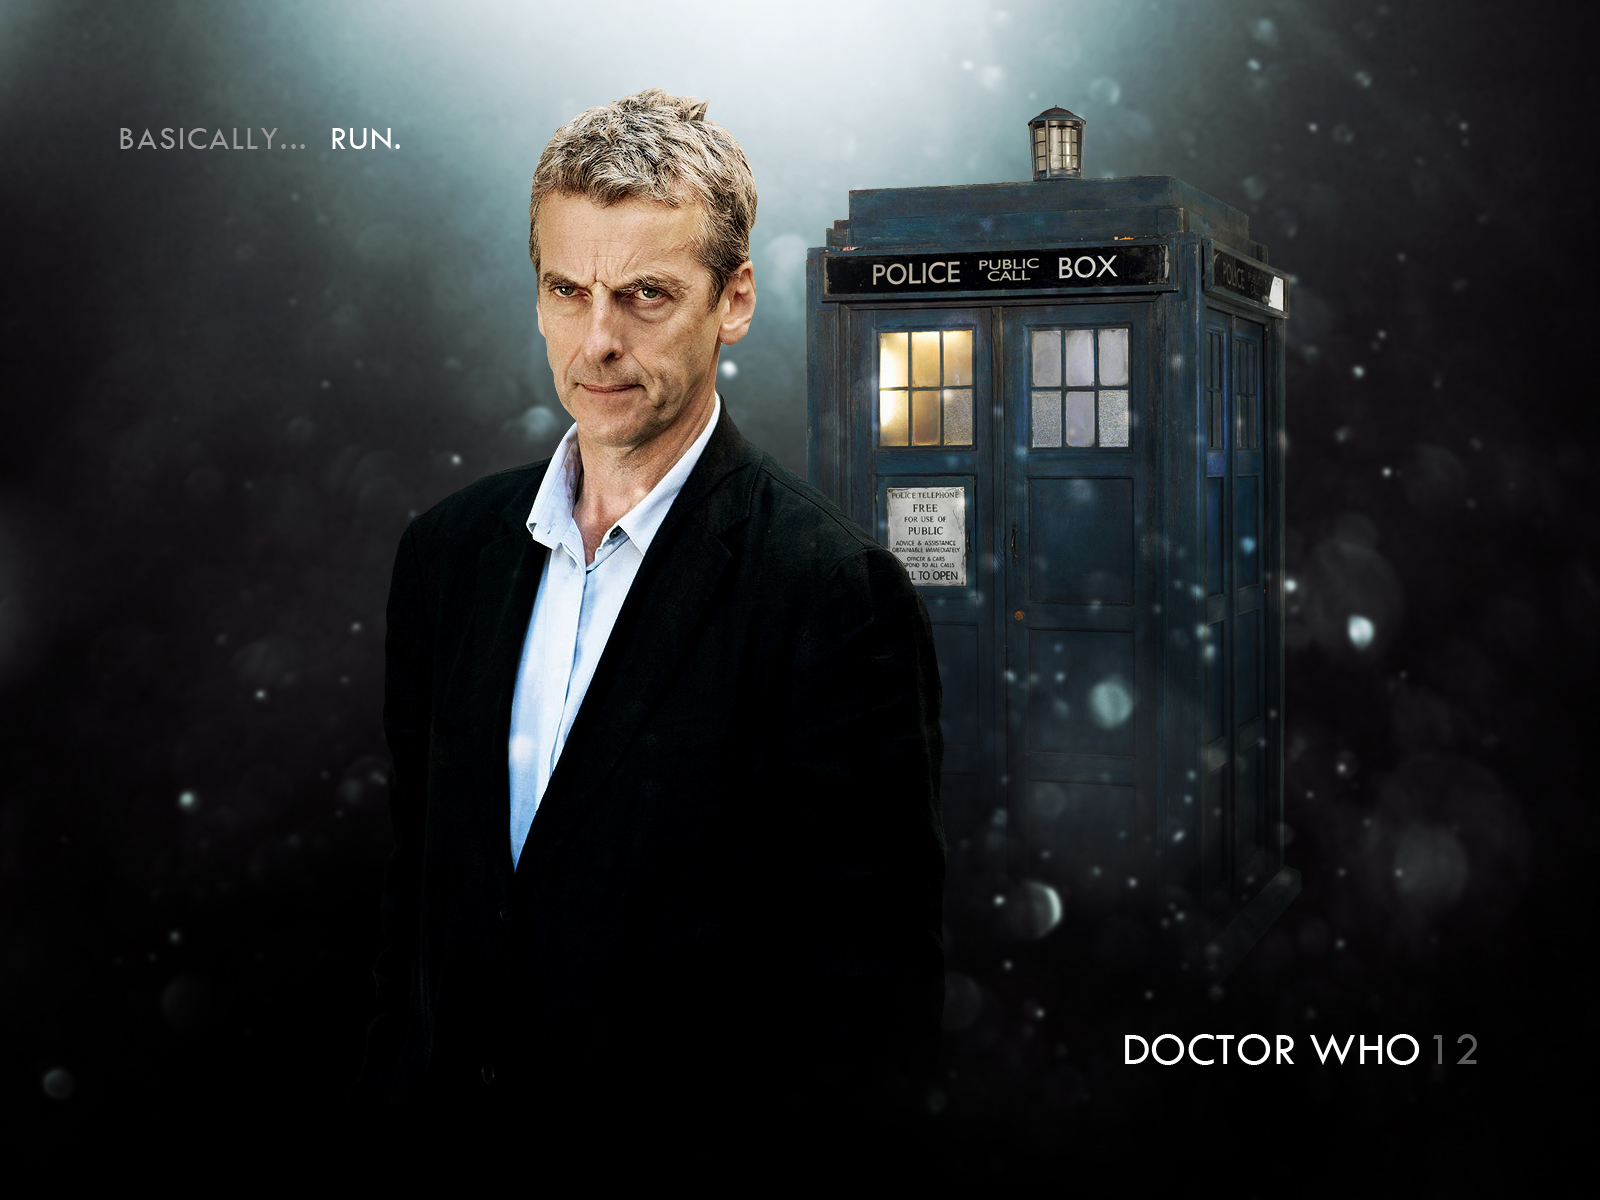 The Twelfth Doctor Who Wallpaper